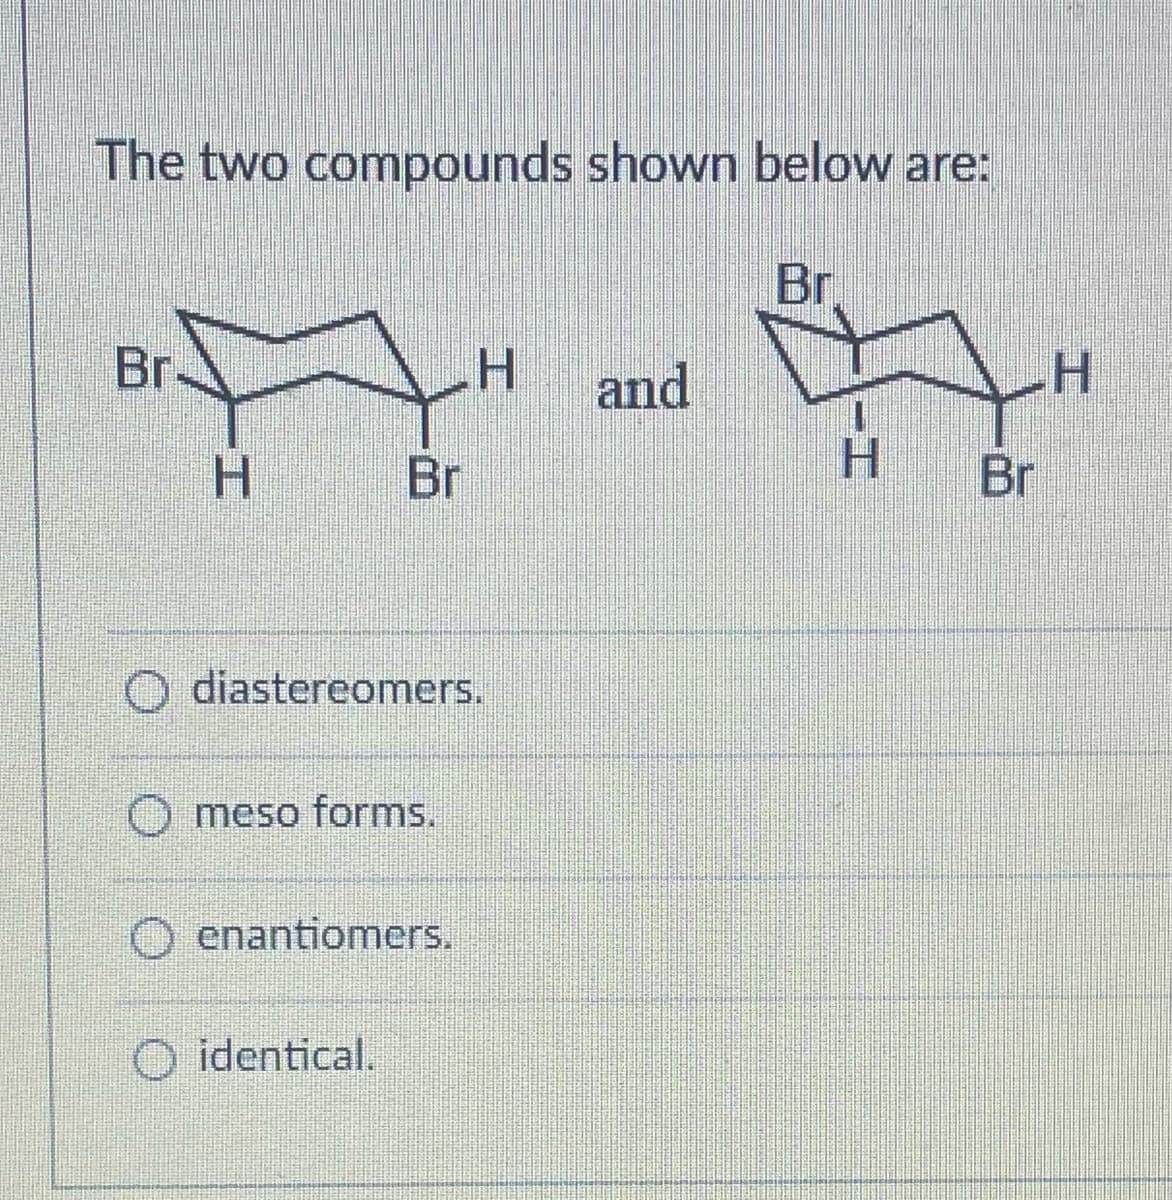 The two compounds shown below are:
Br
A"
H Br
Br.
diastereomers.
O meso forms.
Oenantiomers.
H and
O identical.
H
H
Br
H